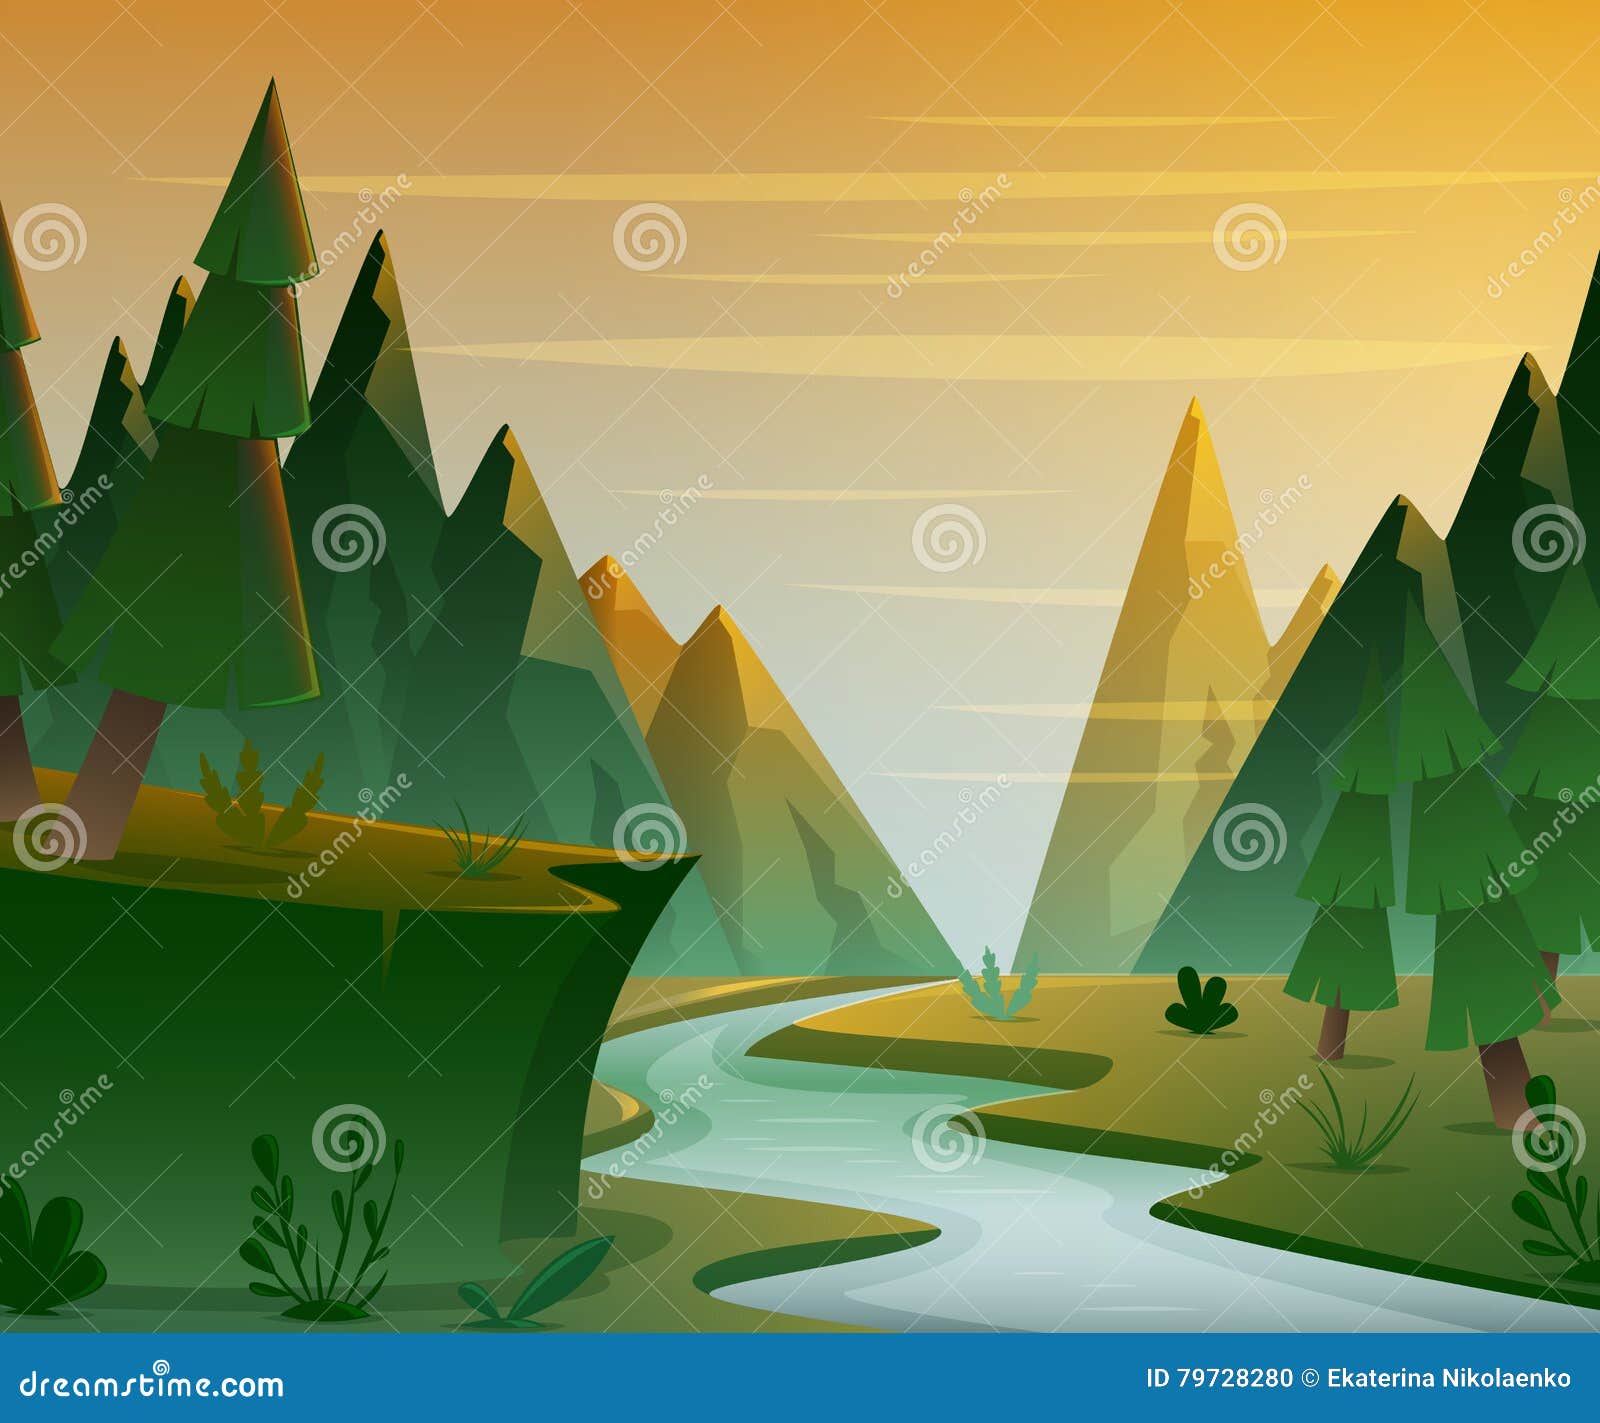 Cartoon Forest Landscape with Mountains, River and Fir-trees. Sunset or  Sunrise Scenery Background Stock Vector - Illustration of river, land:  79728280